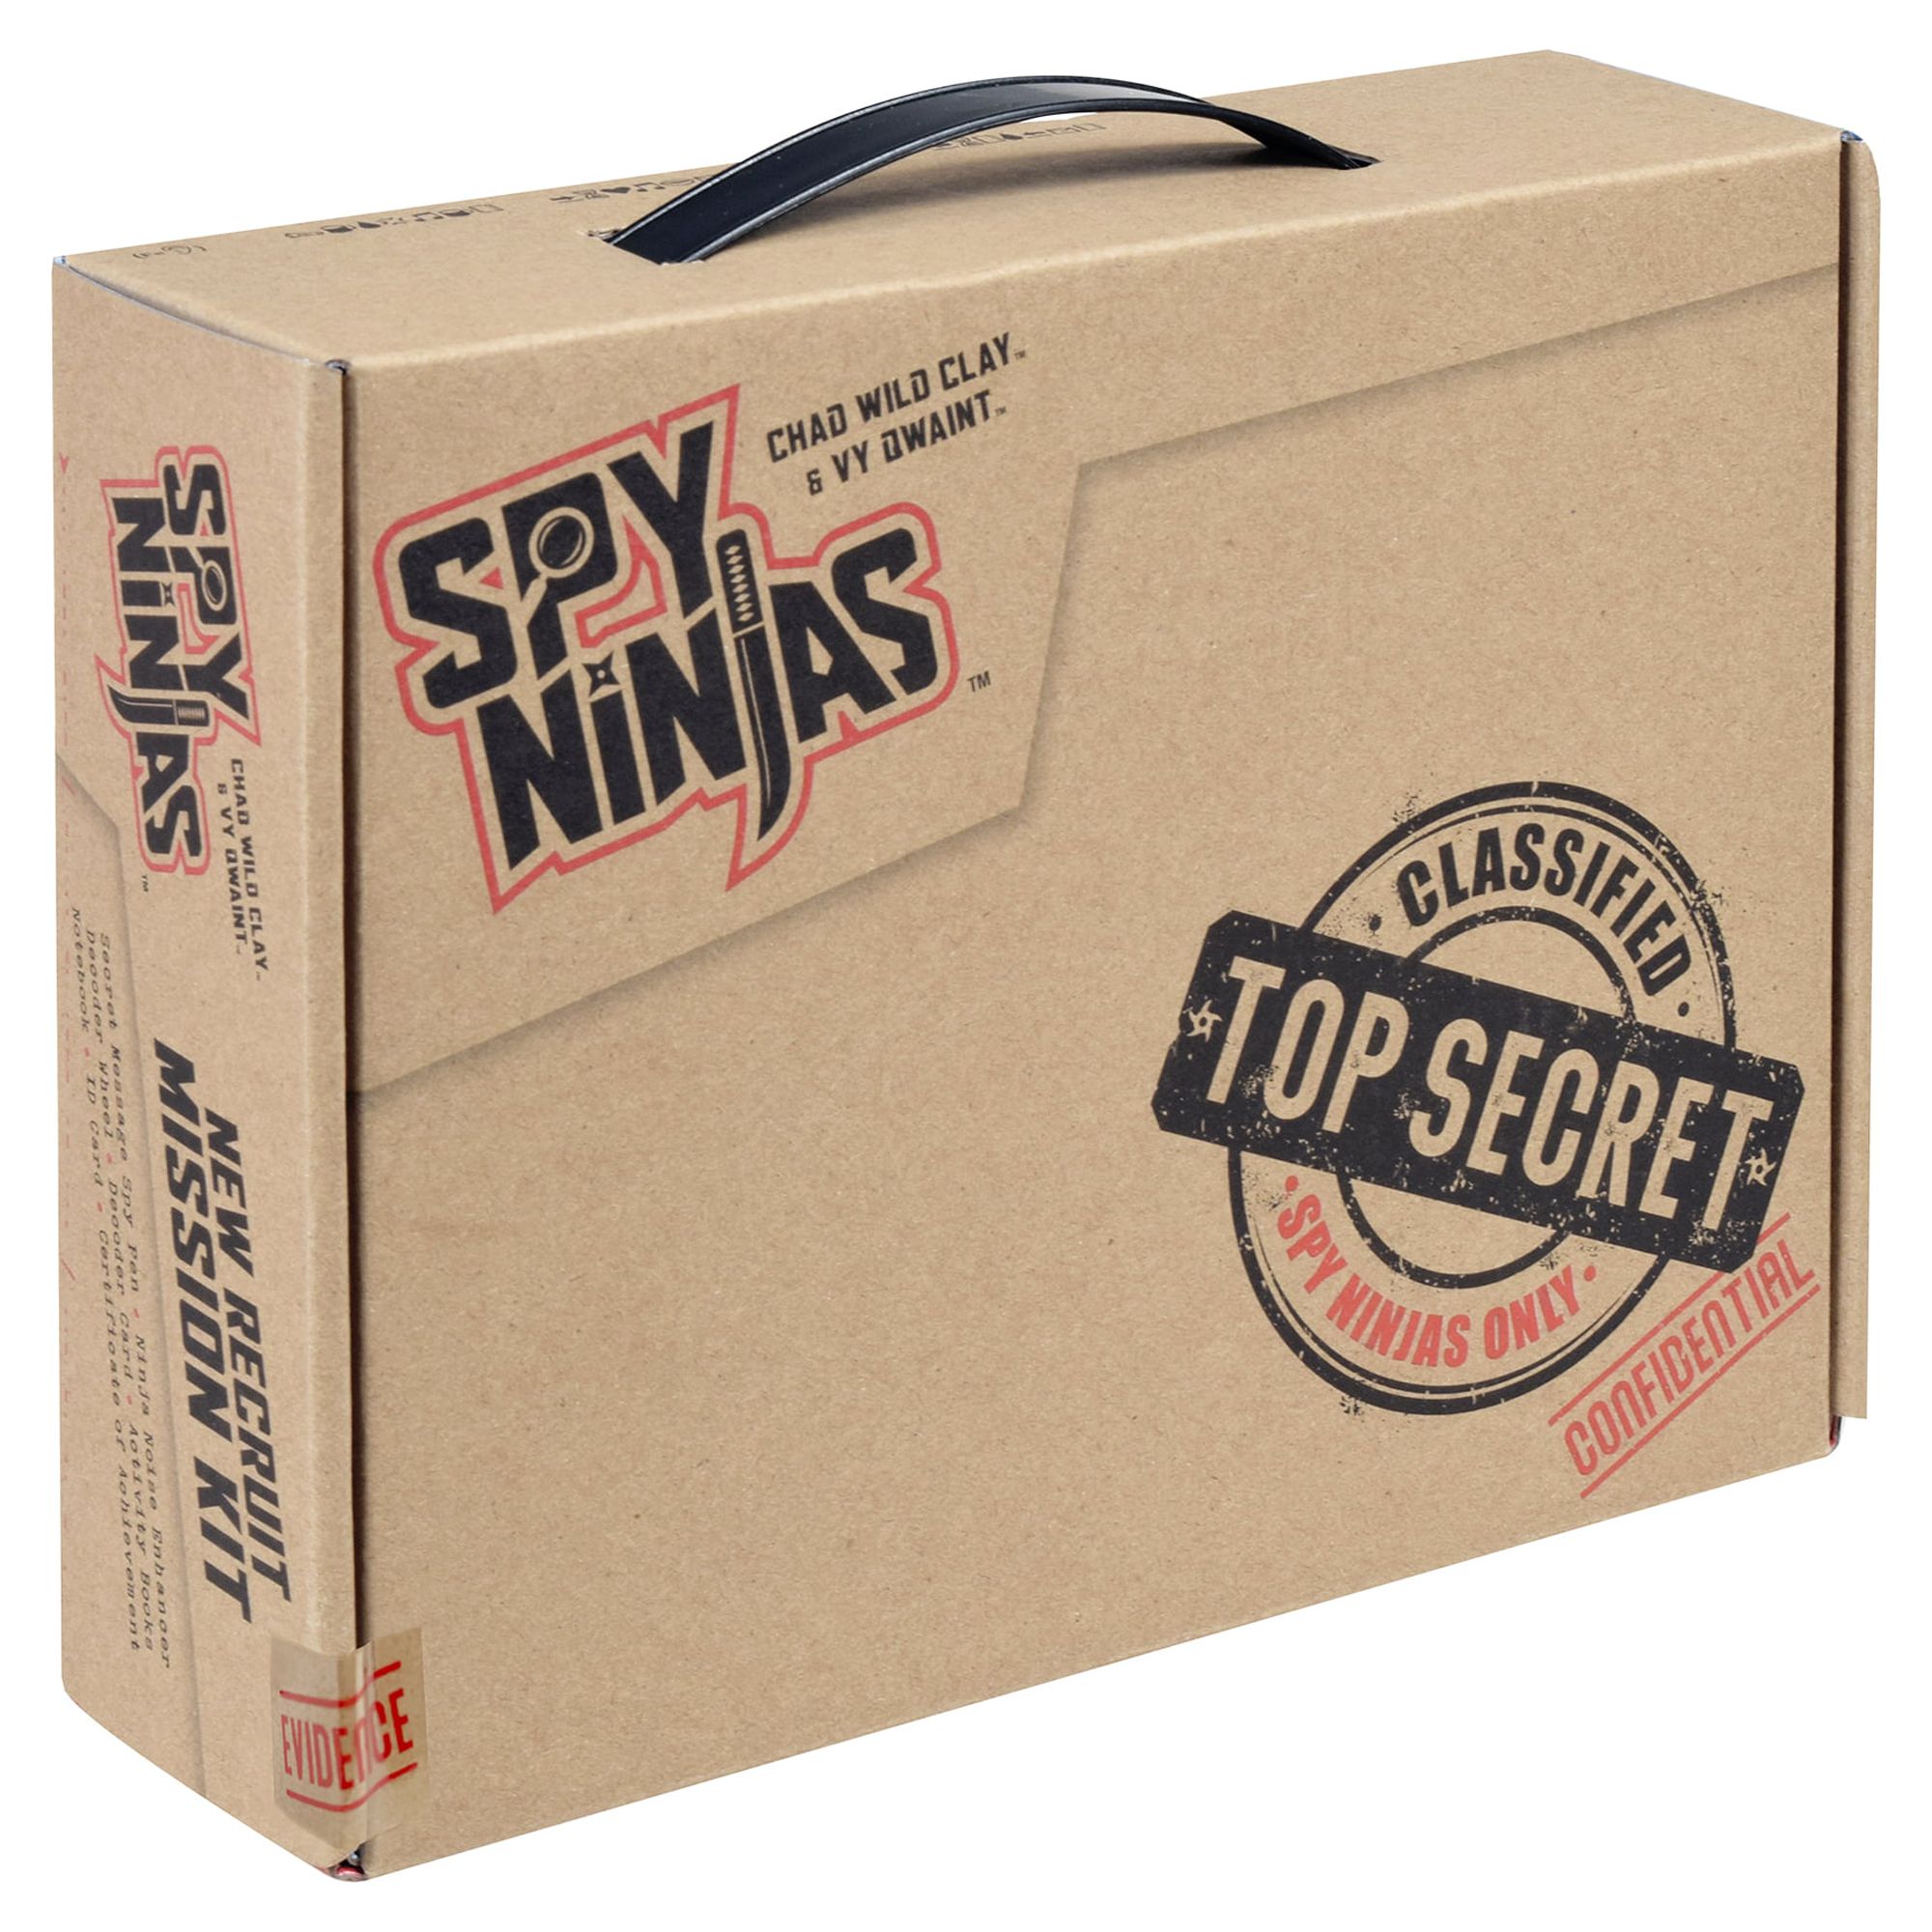 Spy Ninjas New Recruit Mission Kit from Vy Qwaint and Chad Wild Clay - image 9 of 10